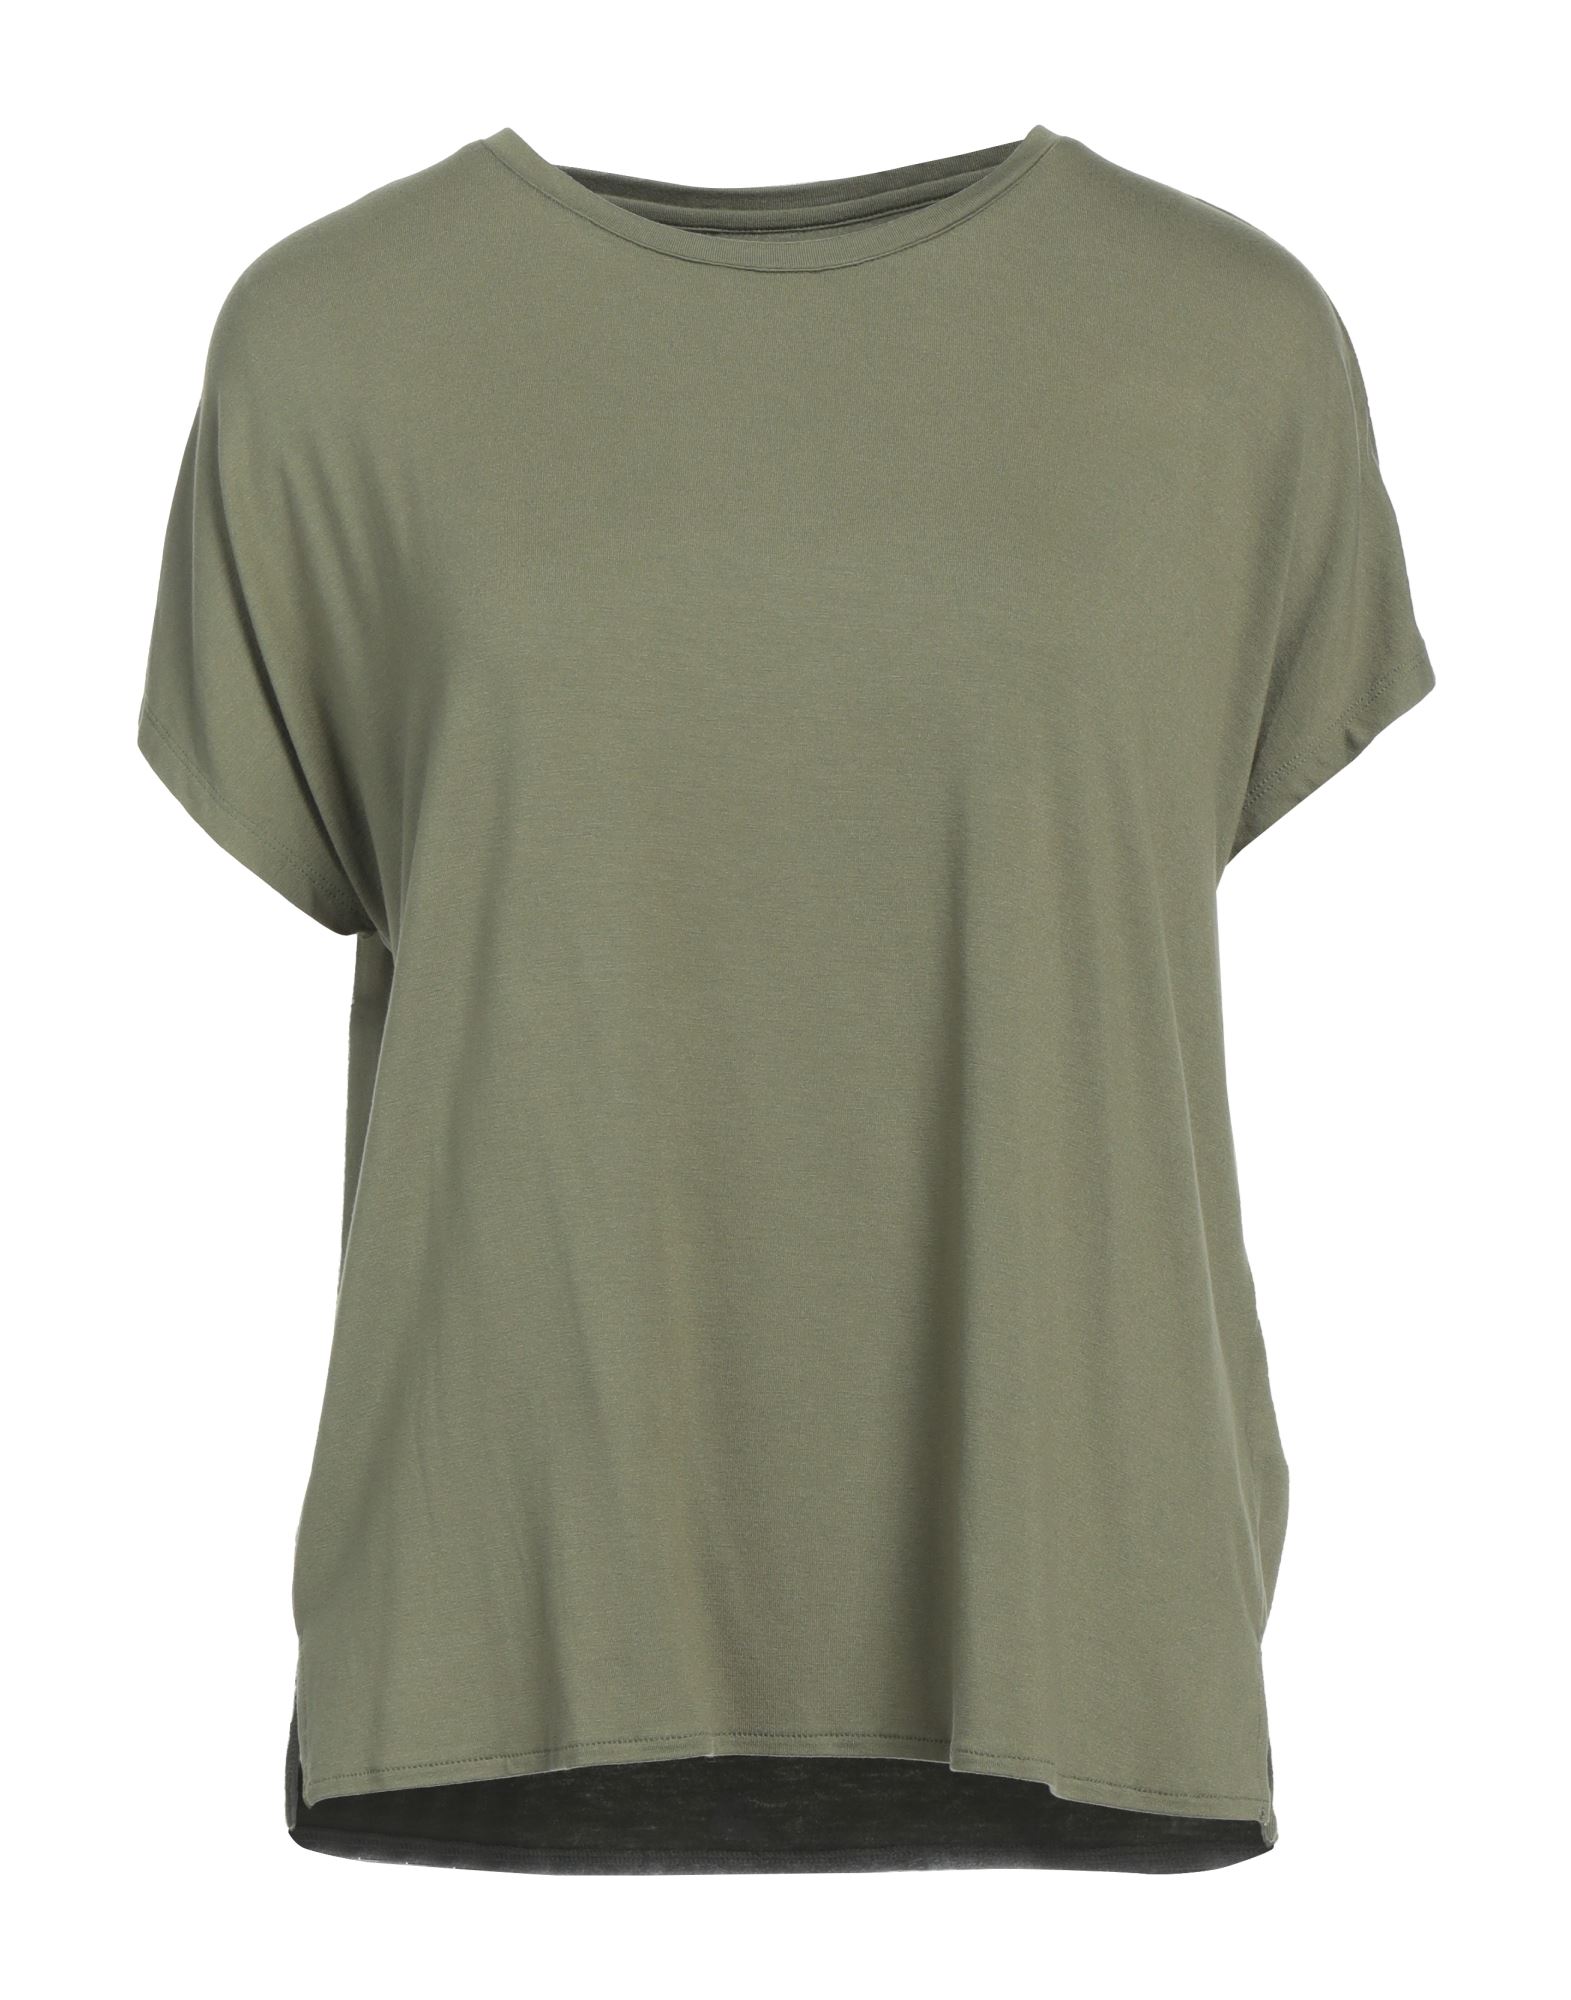 Majestic T-shirts In Green